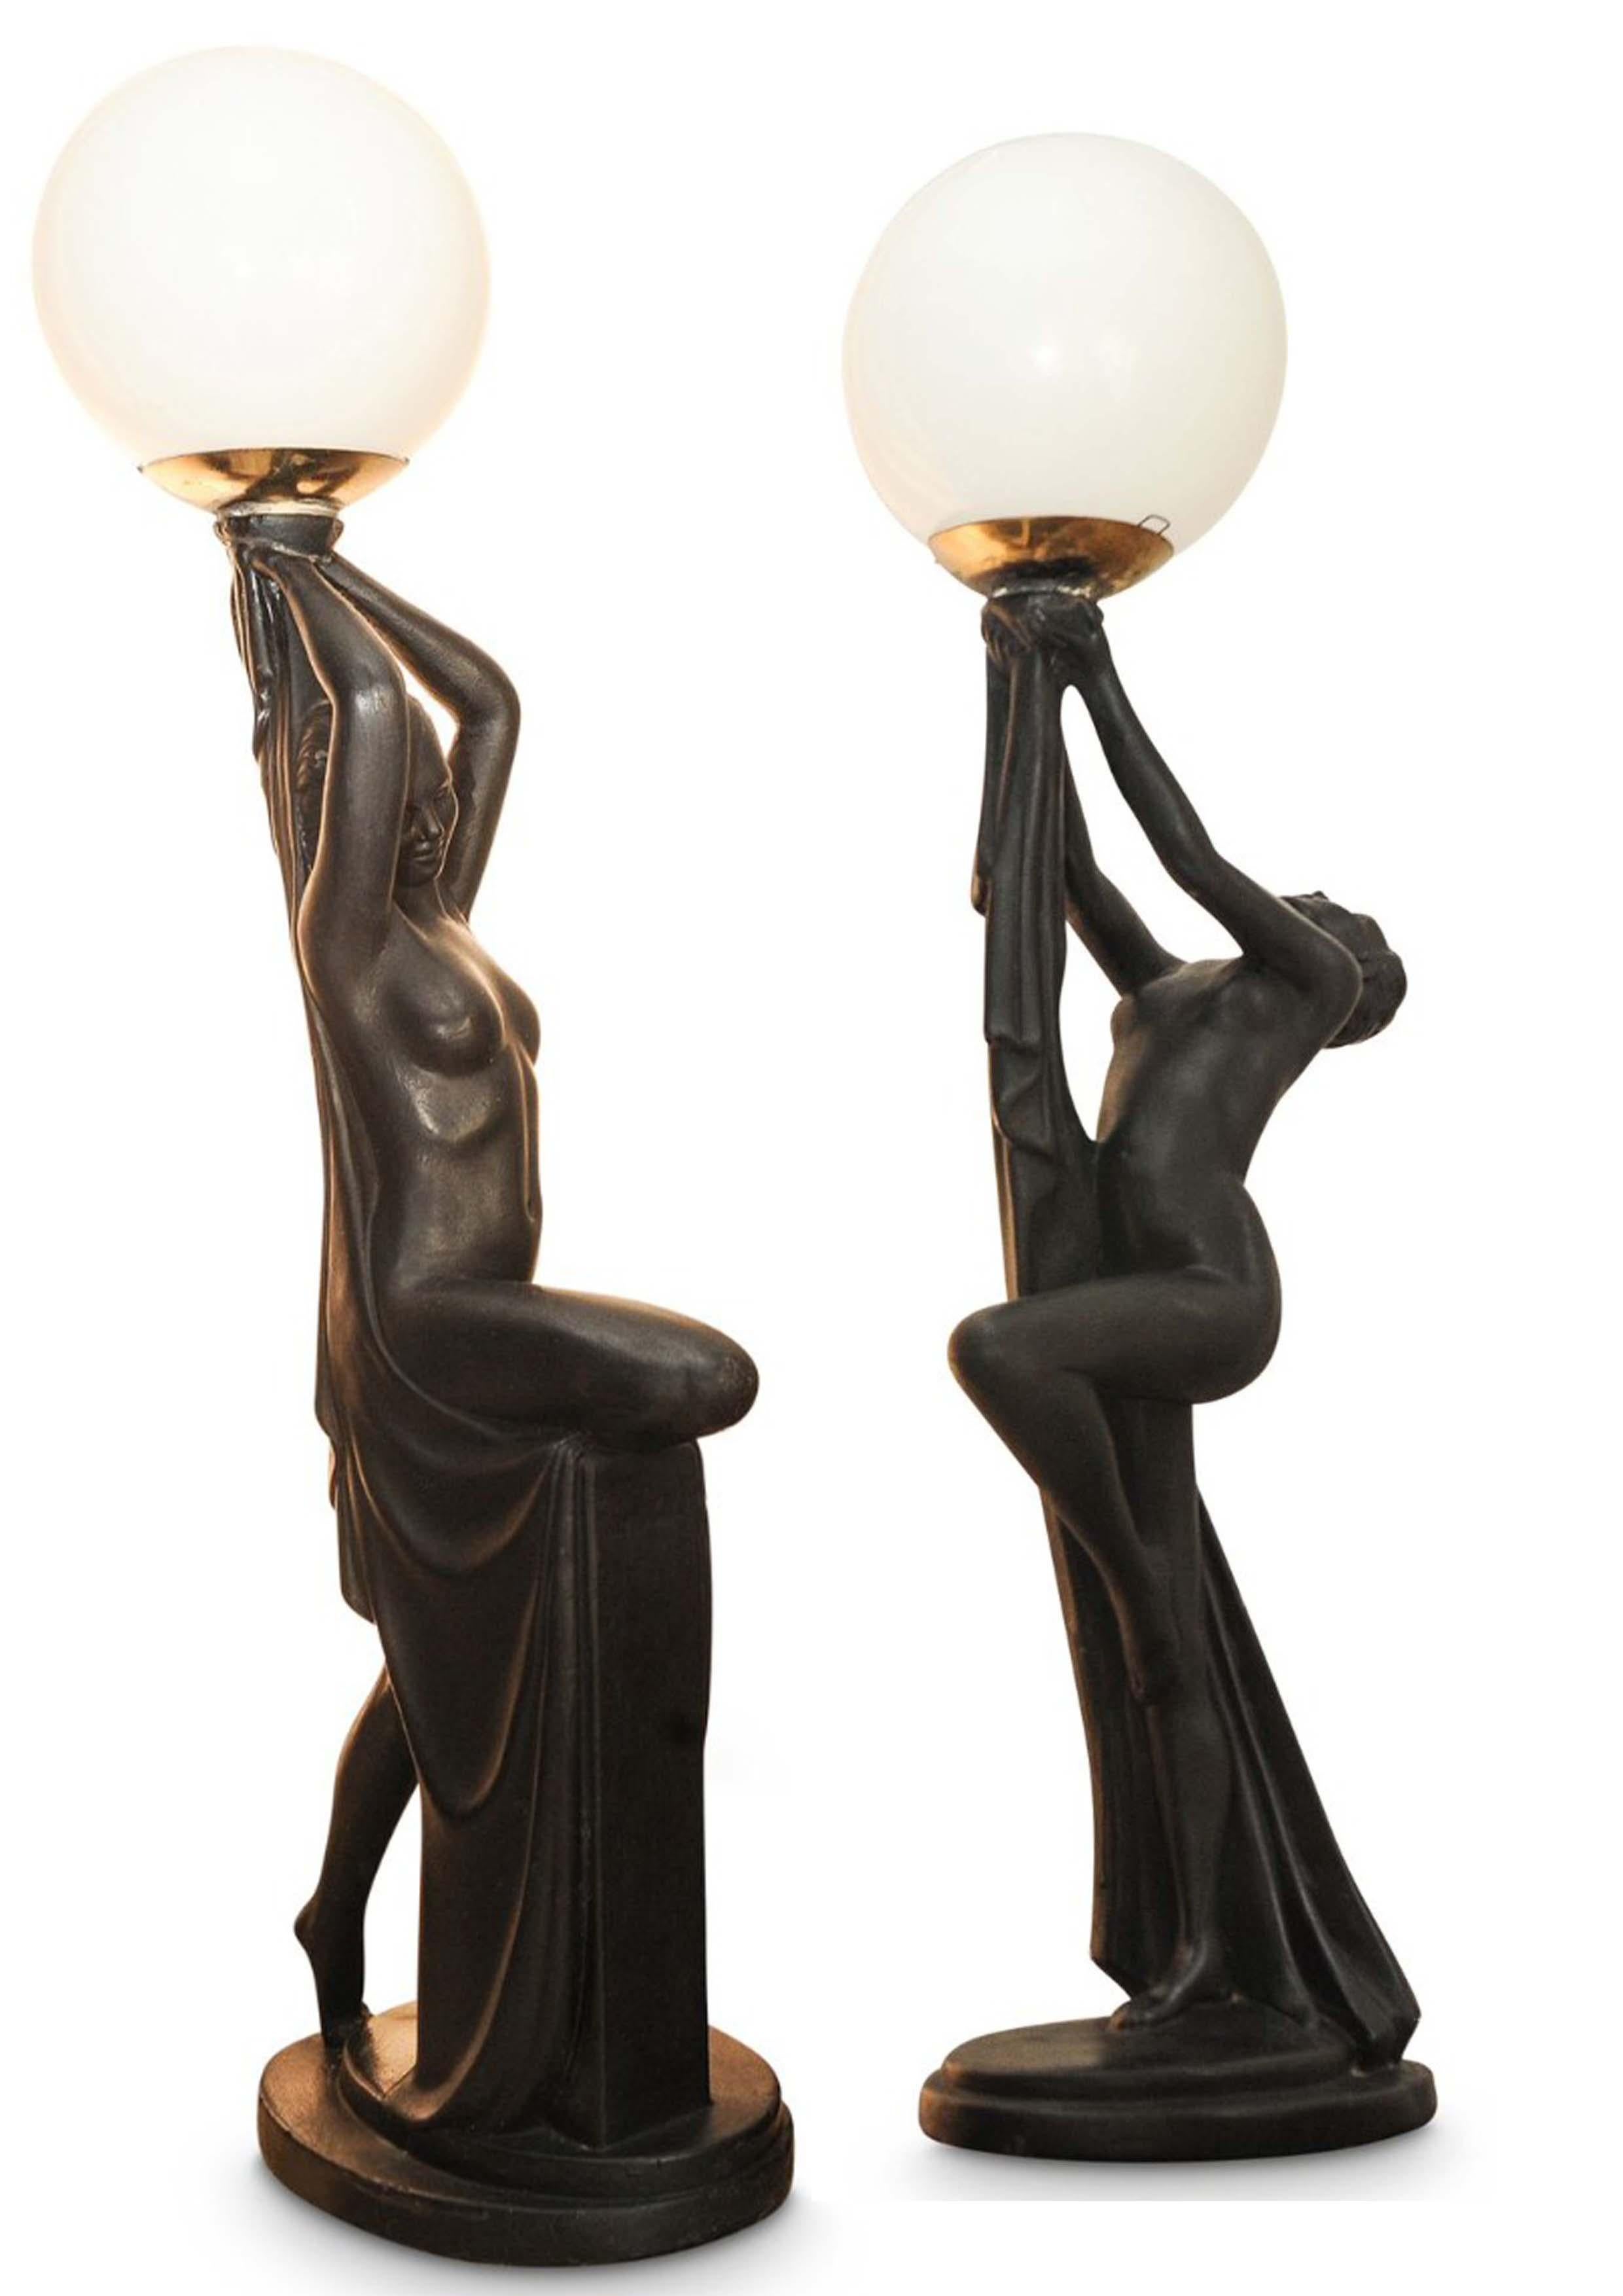 French Pair of Exquisite Art Deco Ebonized Plaster Nude Feminine Form Table Lamps 1930s For Sale